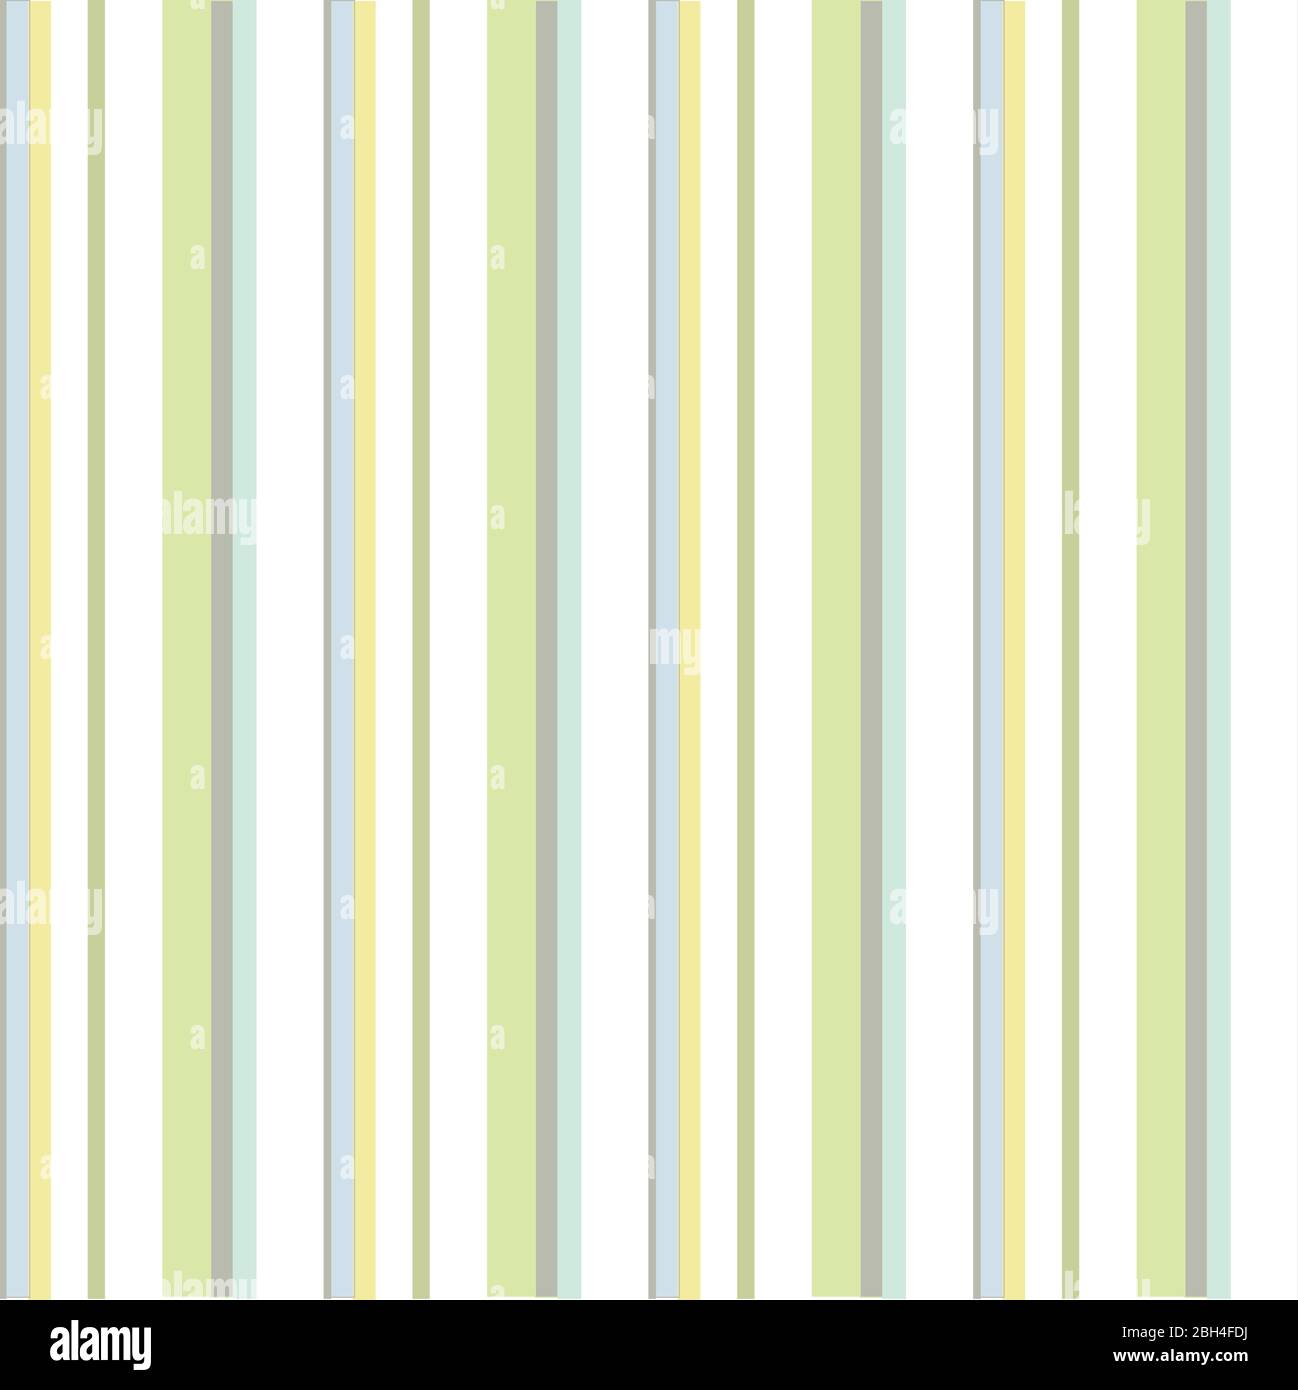 Abstract vector geometric seamless pattern. Vertical stripes. Monochrome background. Wrapping paper. Print for interior design and fabric. Kids backgr Stock Vector